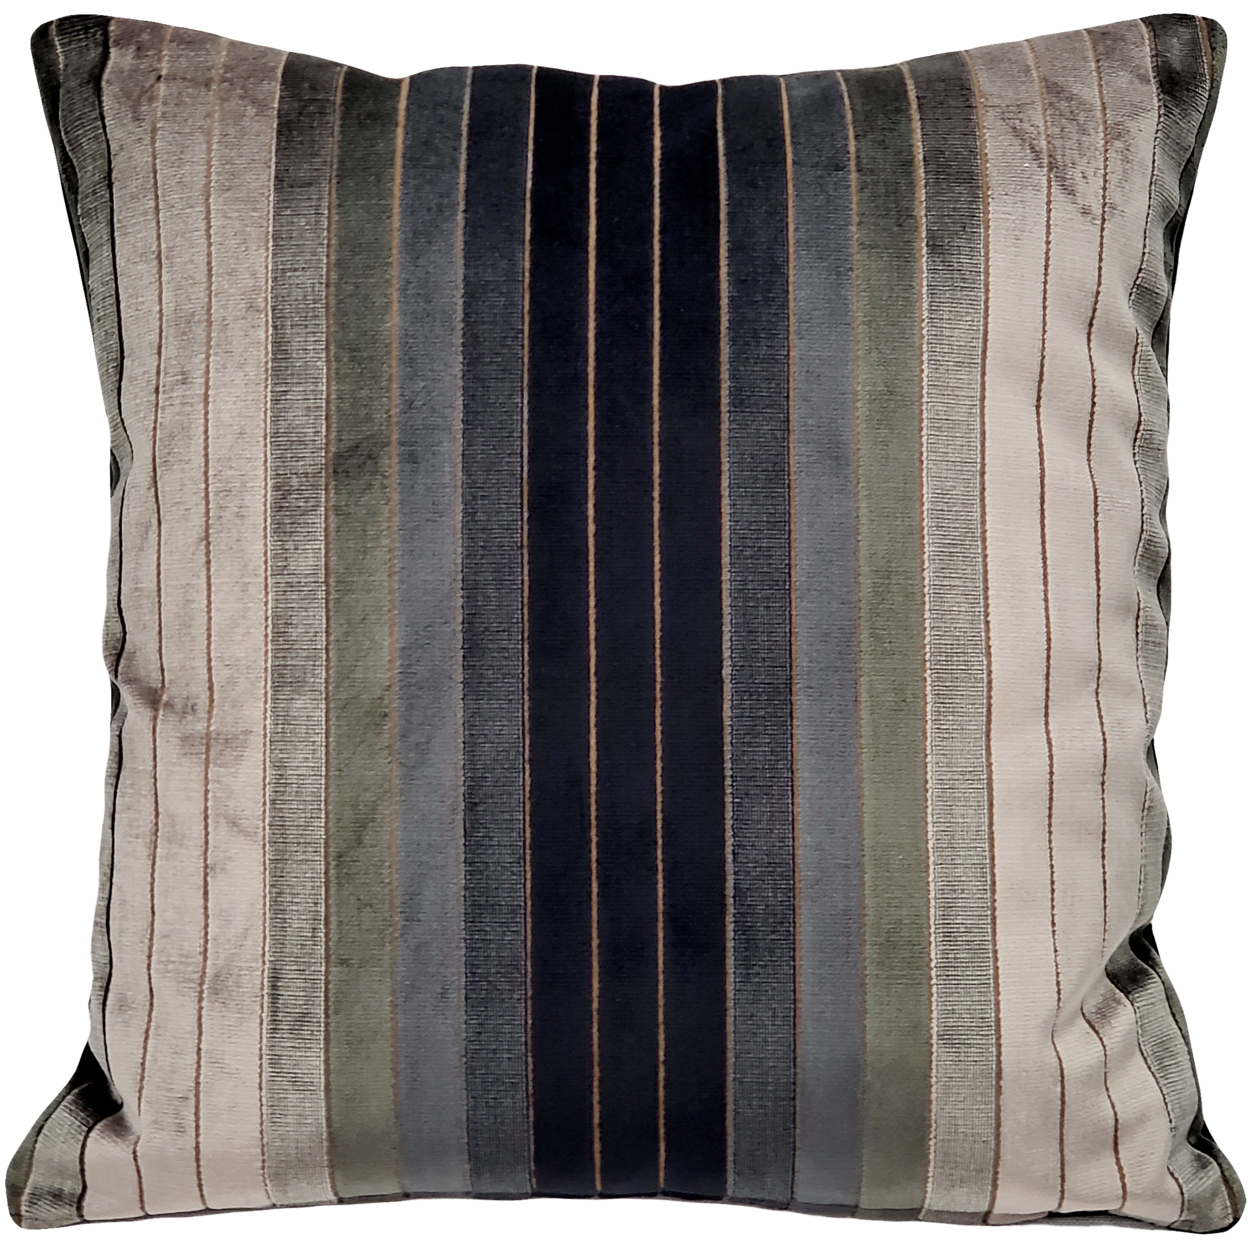 Carbon Stripes Textured Velvet Throw Pillow 20x20 Inches Square, Complete Pillow with Polyfill Pillow Insert